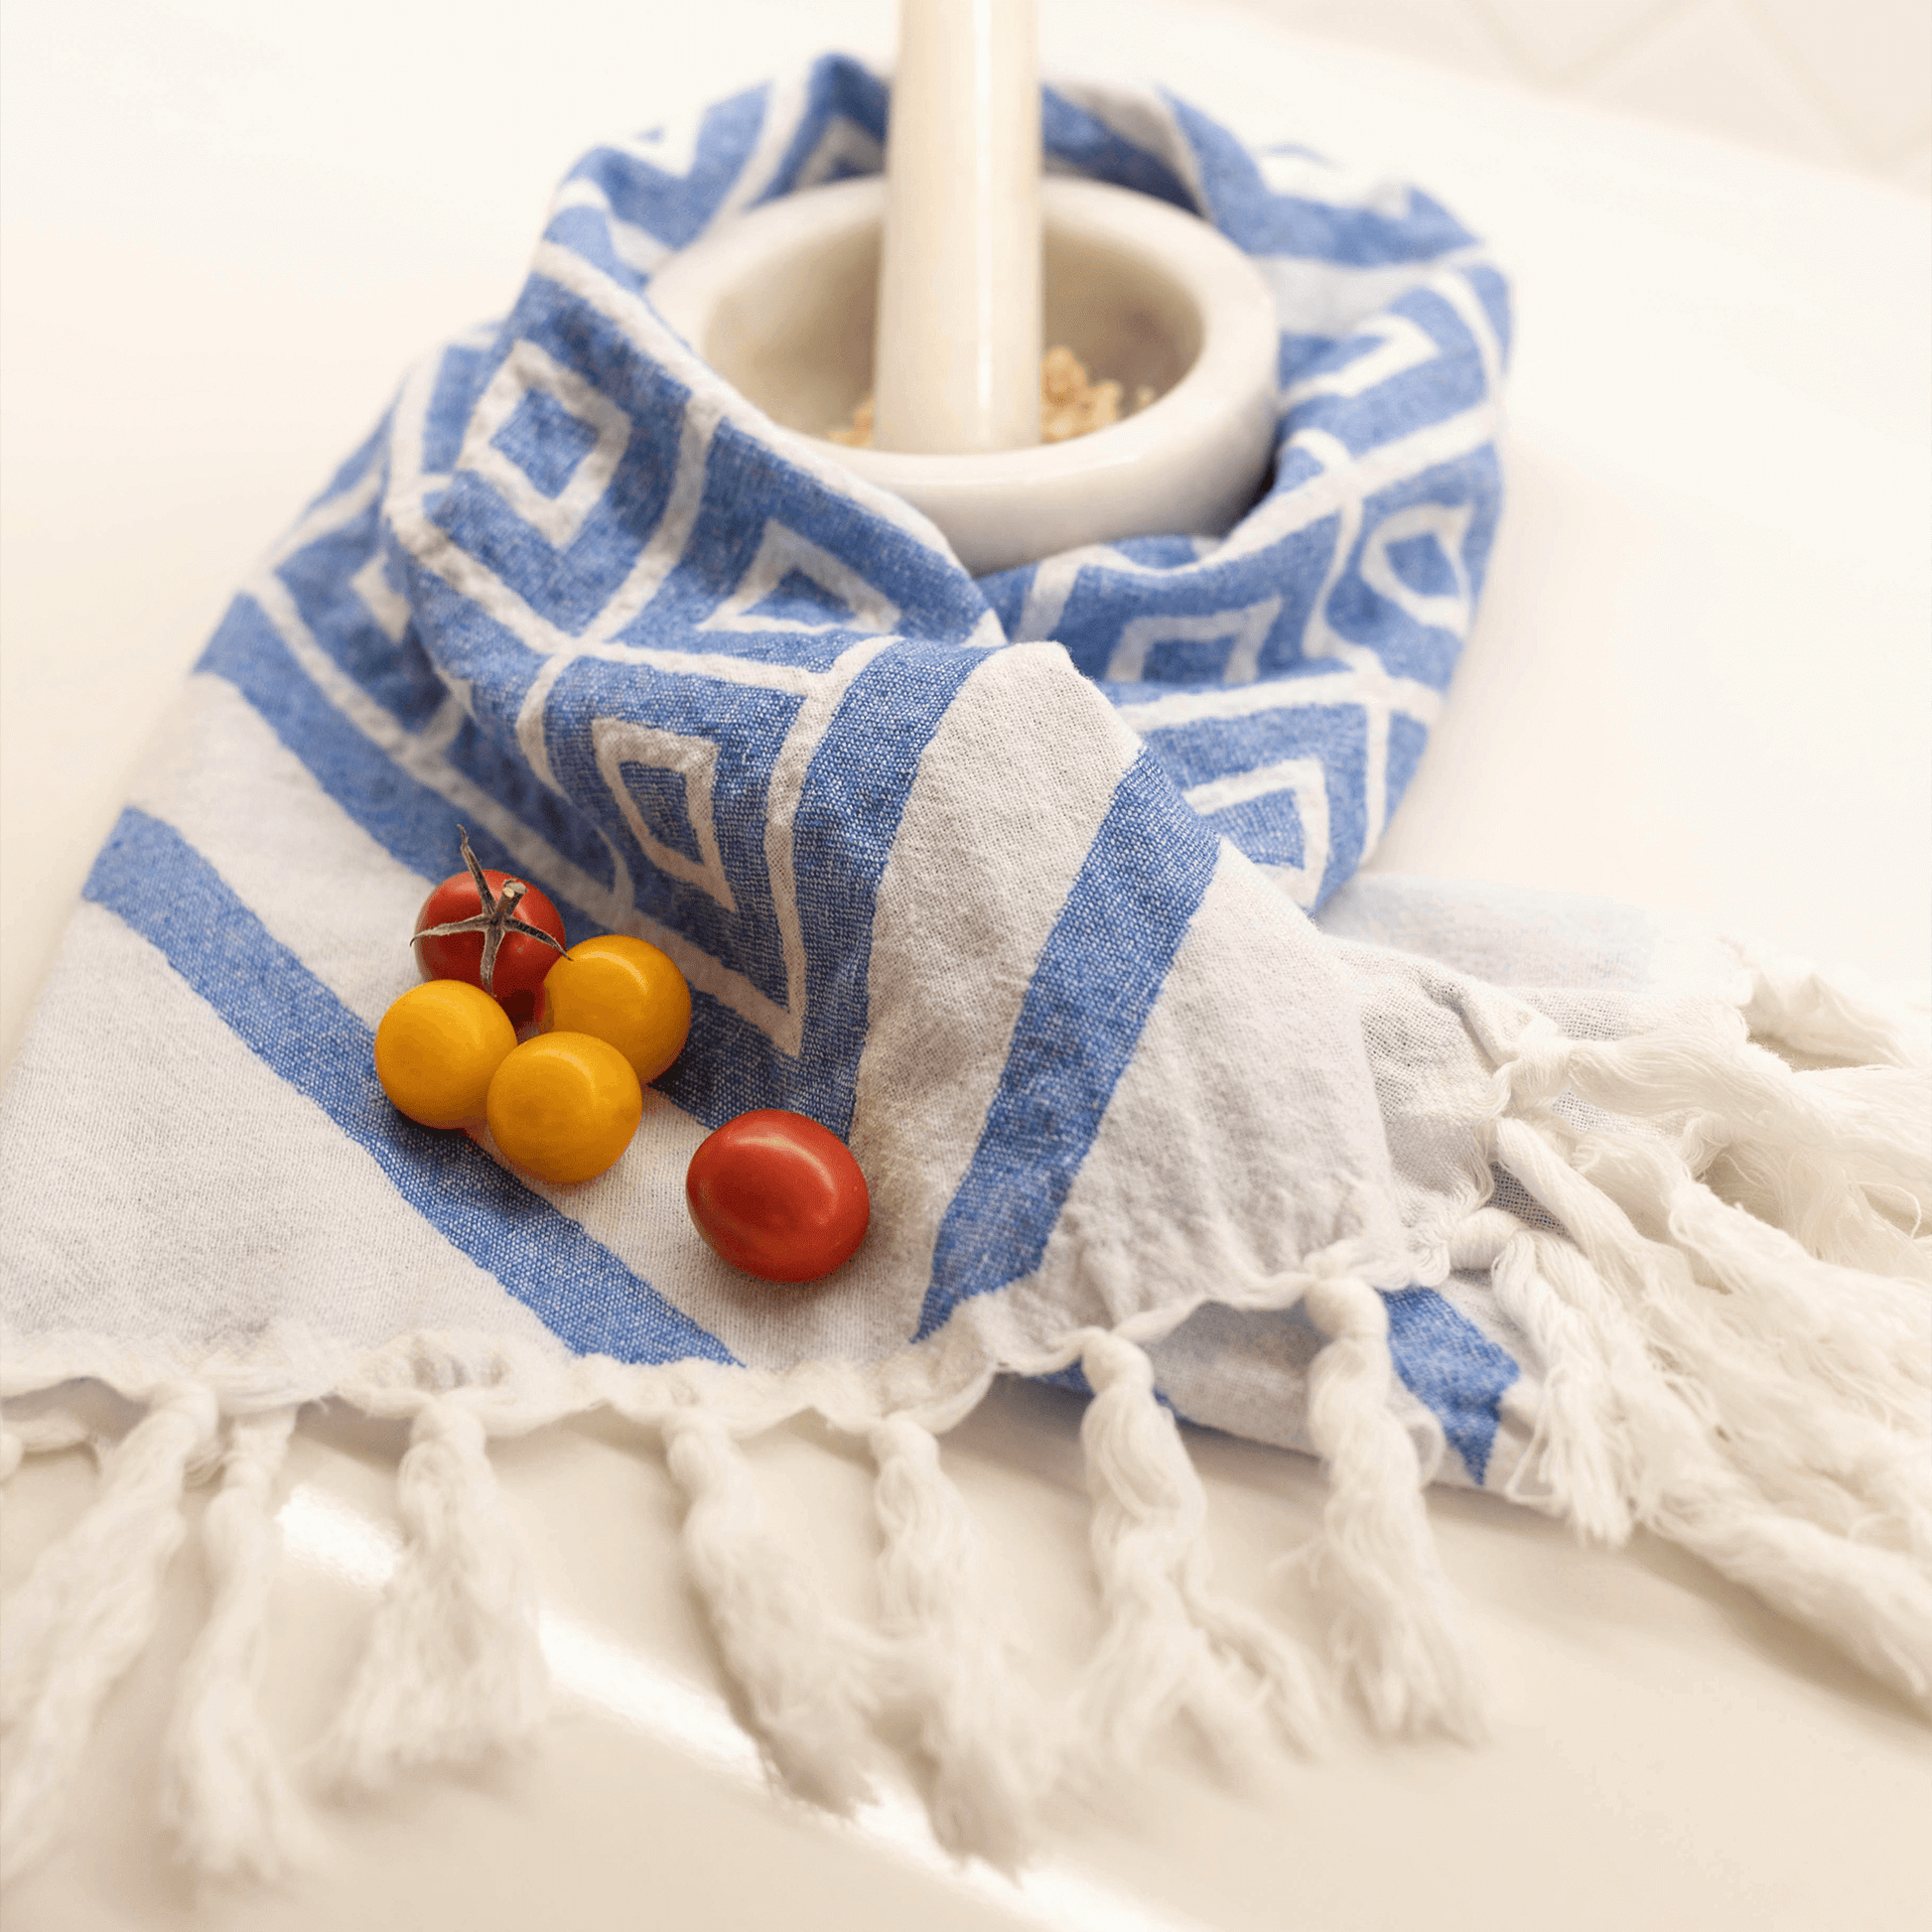 White and blue Turkish towel in the kitchen with a mortar and pestal